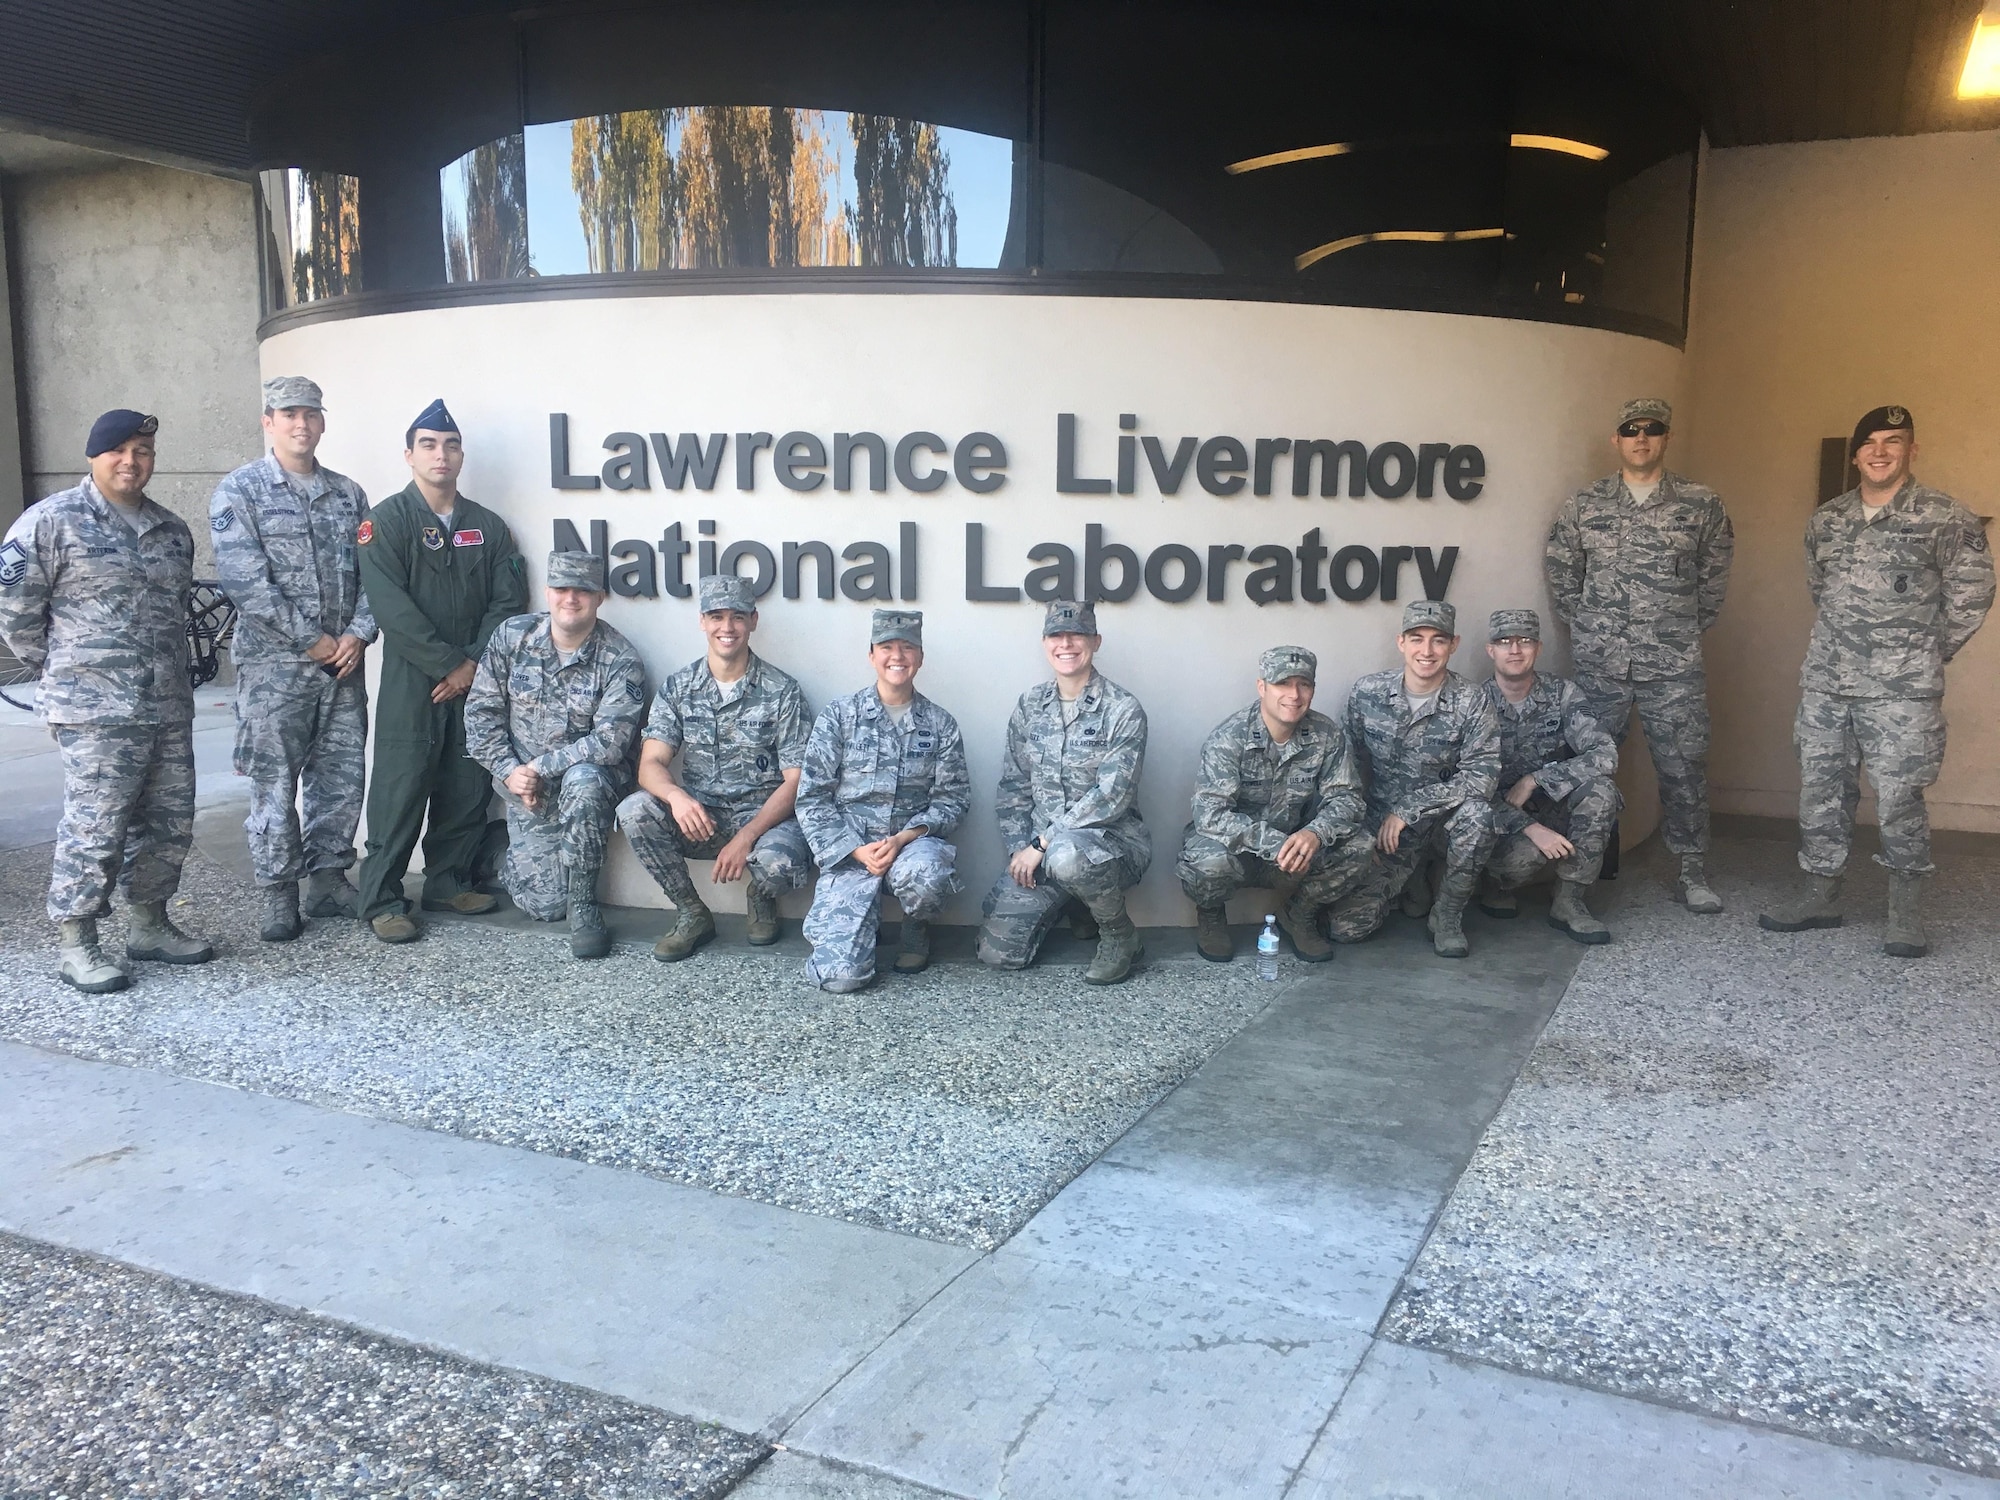 Airmen from across 20th Air Force visit the Lawrence Livermore National Laboratory in California, Nov. 8-9. LLNL is one of seventeen labs in the Department of Energy, and leverages cutting-edge technology and engineering to tackle prevalent national security challenges. The tour was one of the many professional development trips the 20th AF ICBM Center of Excellence will offer this year. (U.S. Air Force Photo by 1st Lt. Esther Willett)